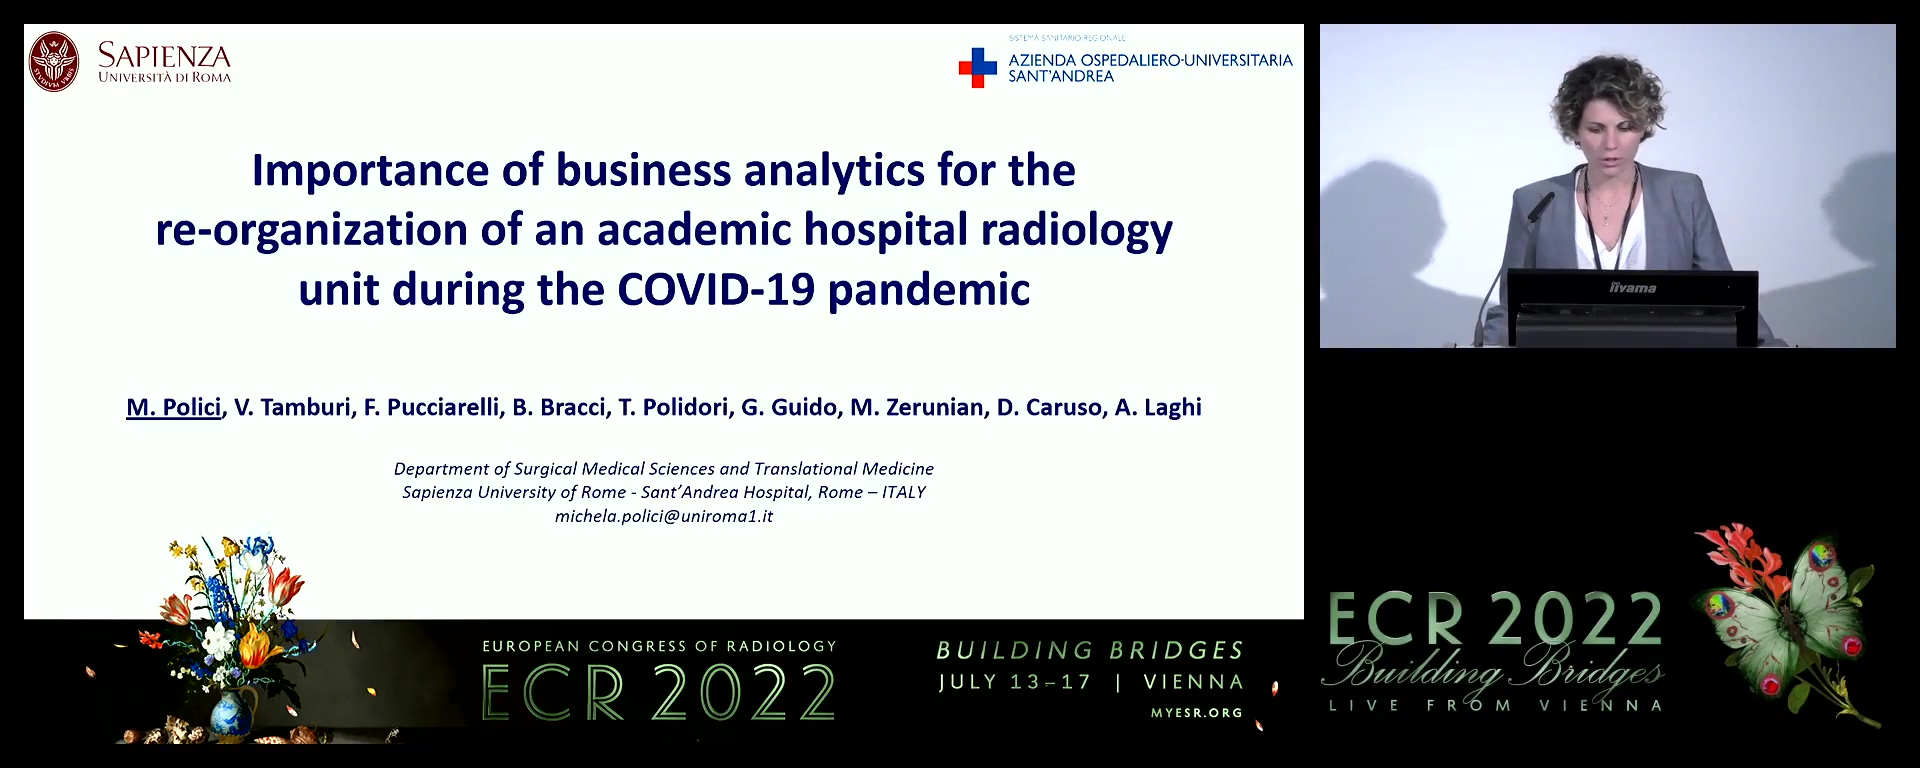 Importance of business analytics for the re-organization of an academic hospital radiology unit during the COVID-19 pandemic